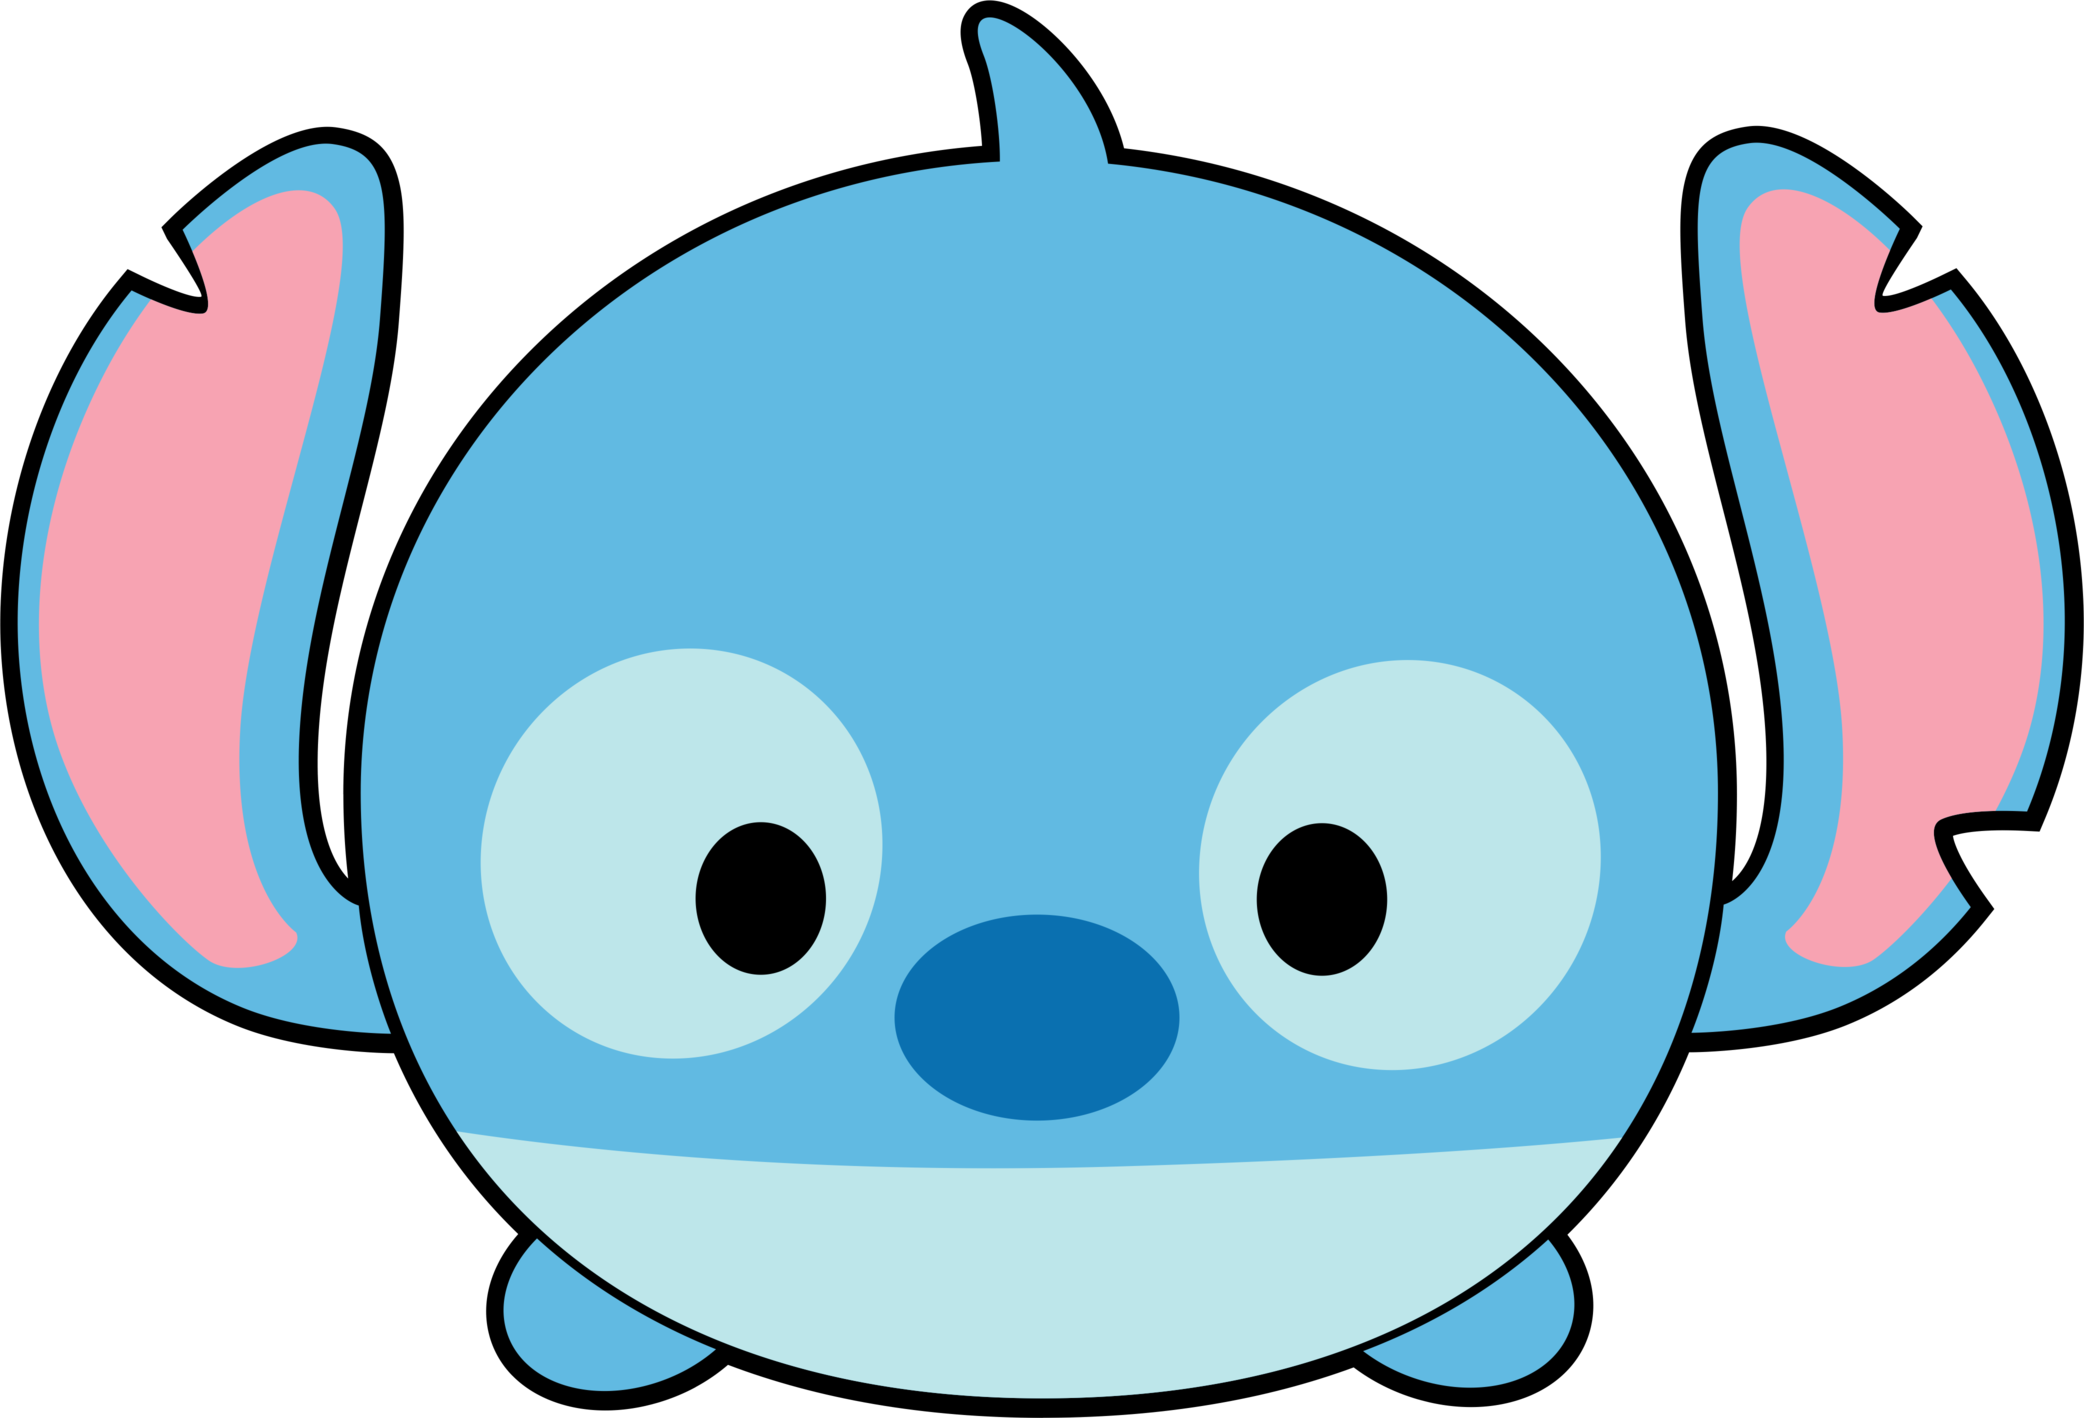 Download Tsum Tsum Stitch Cartoon PNG Image with No Background 